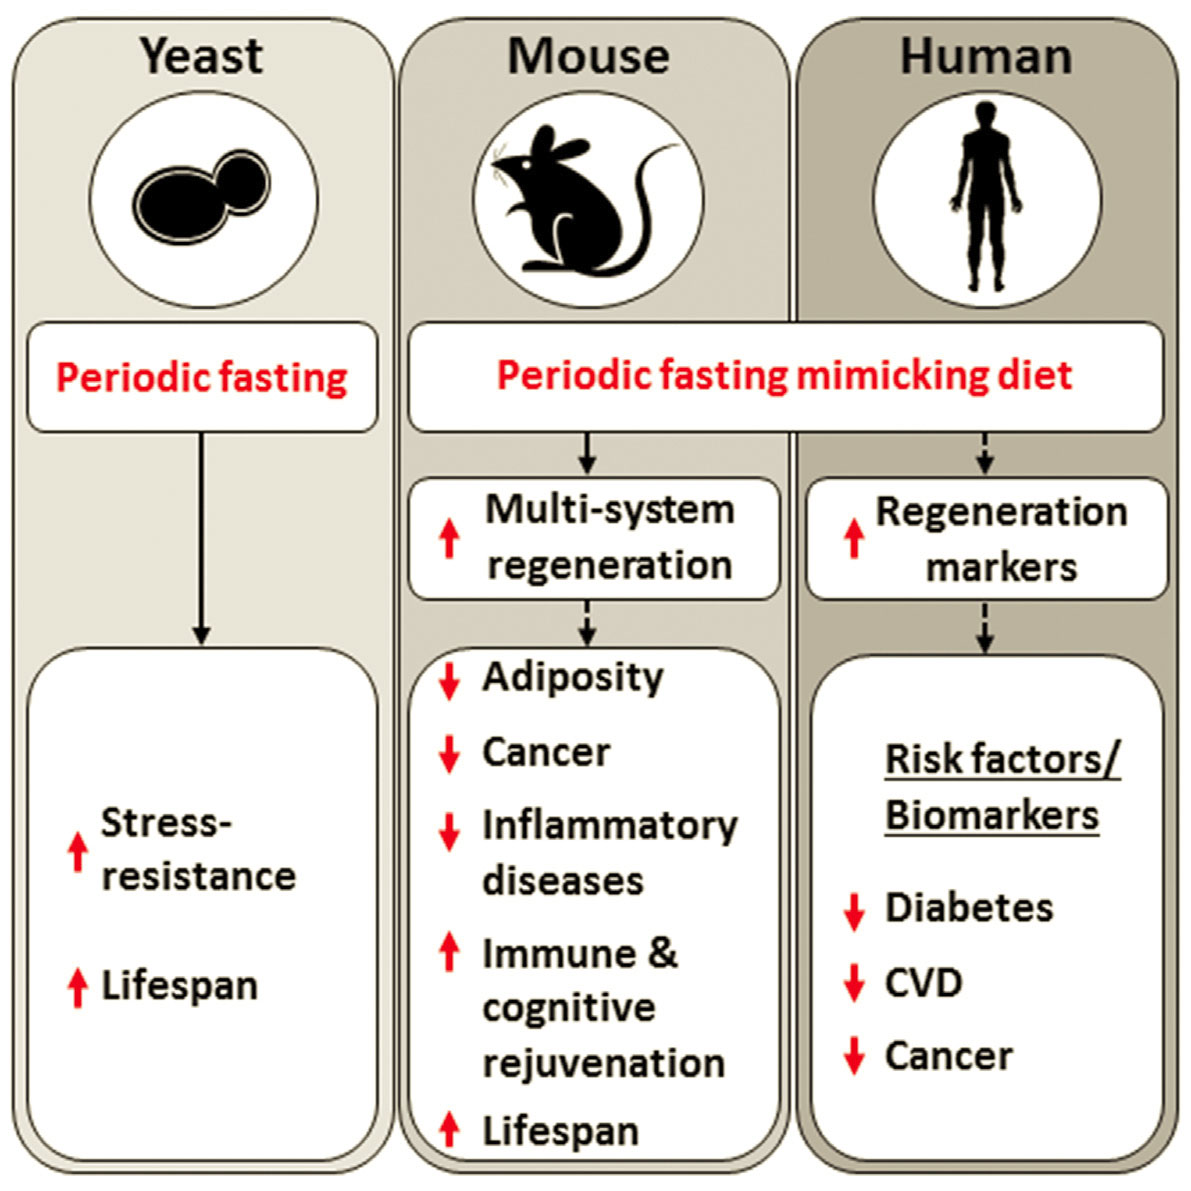 Resist and disorder. Fasting mimicking Diet. Biomarkers of Human Aging. Fast mimicking Diet. Mimicking.